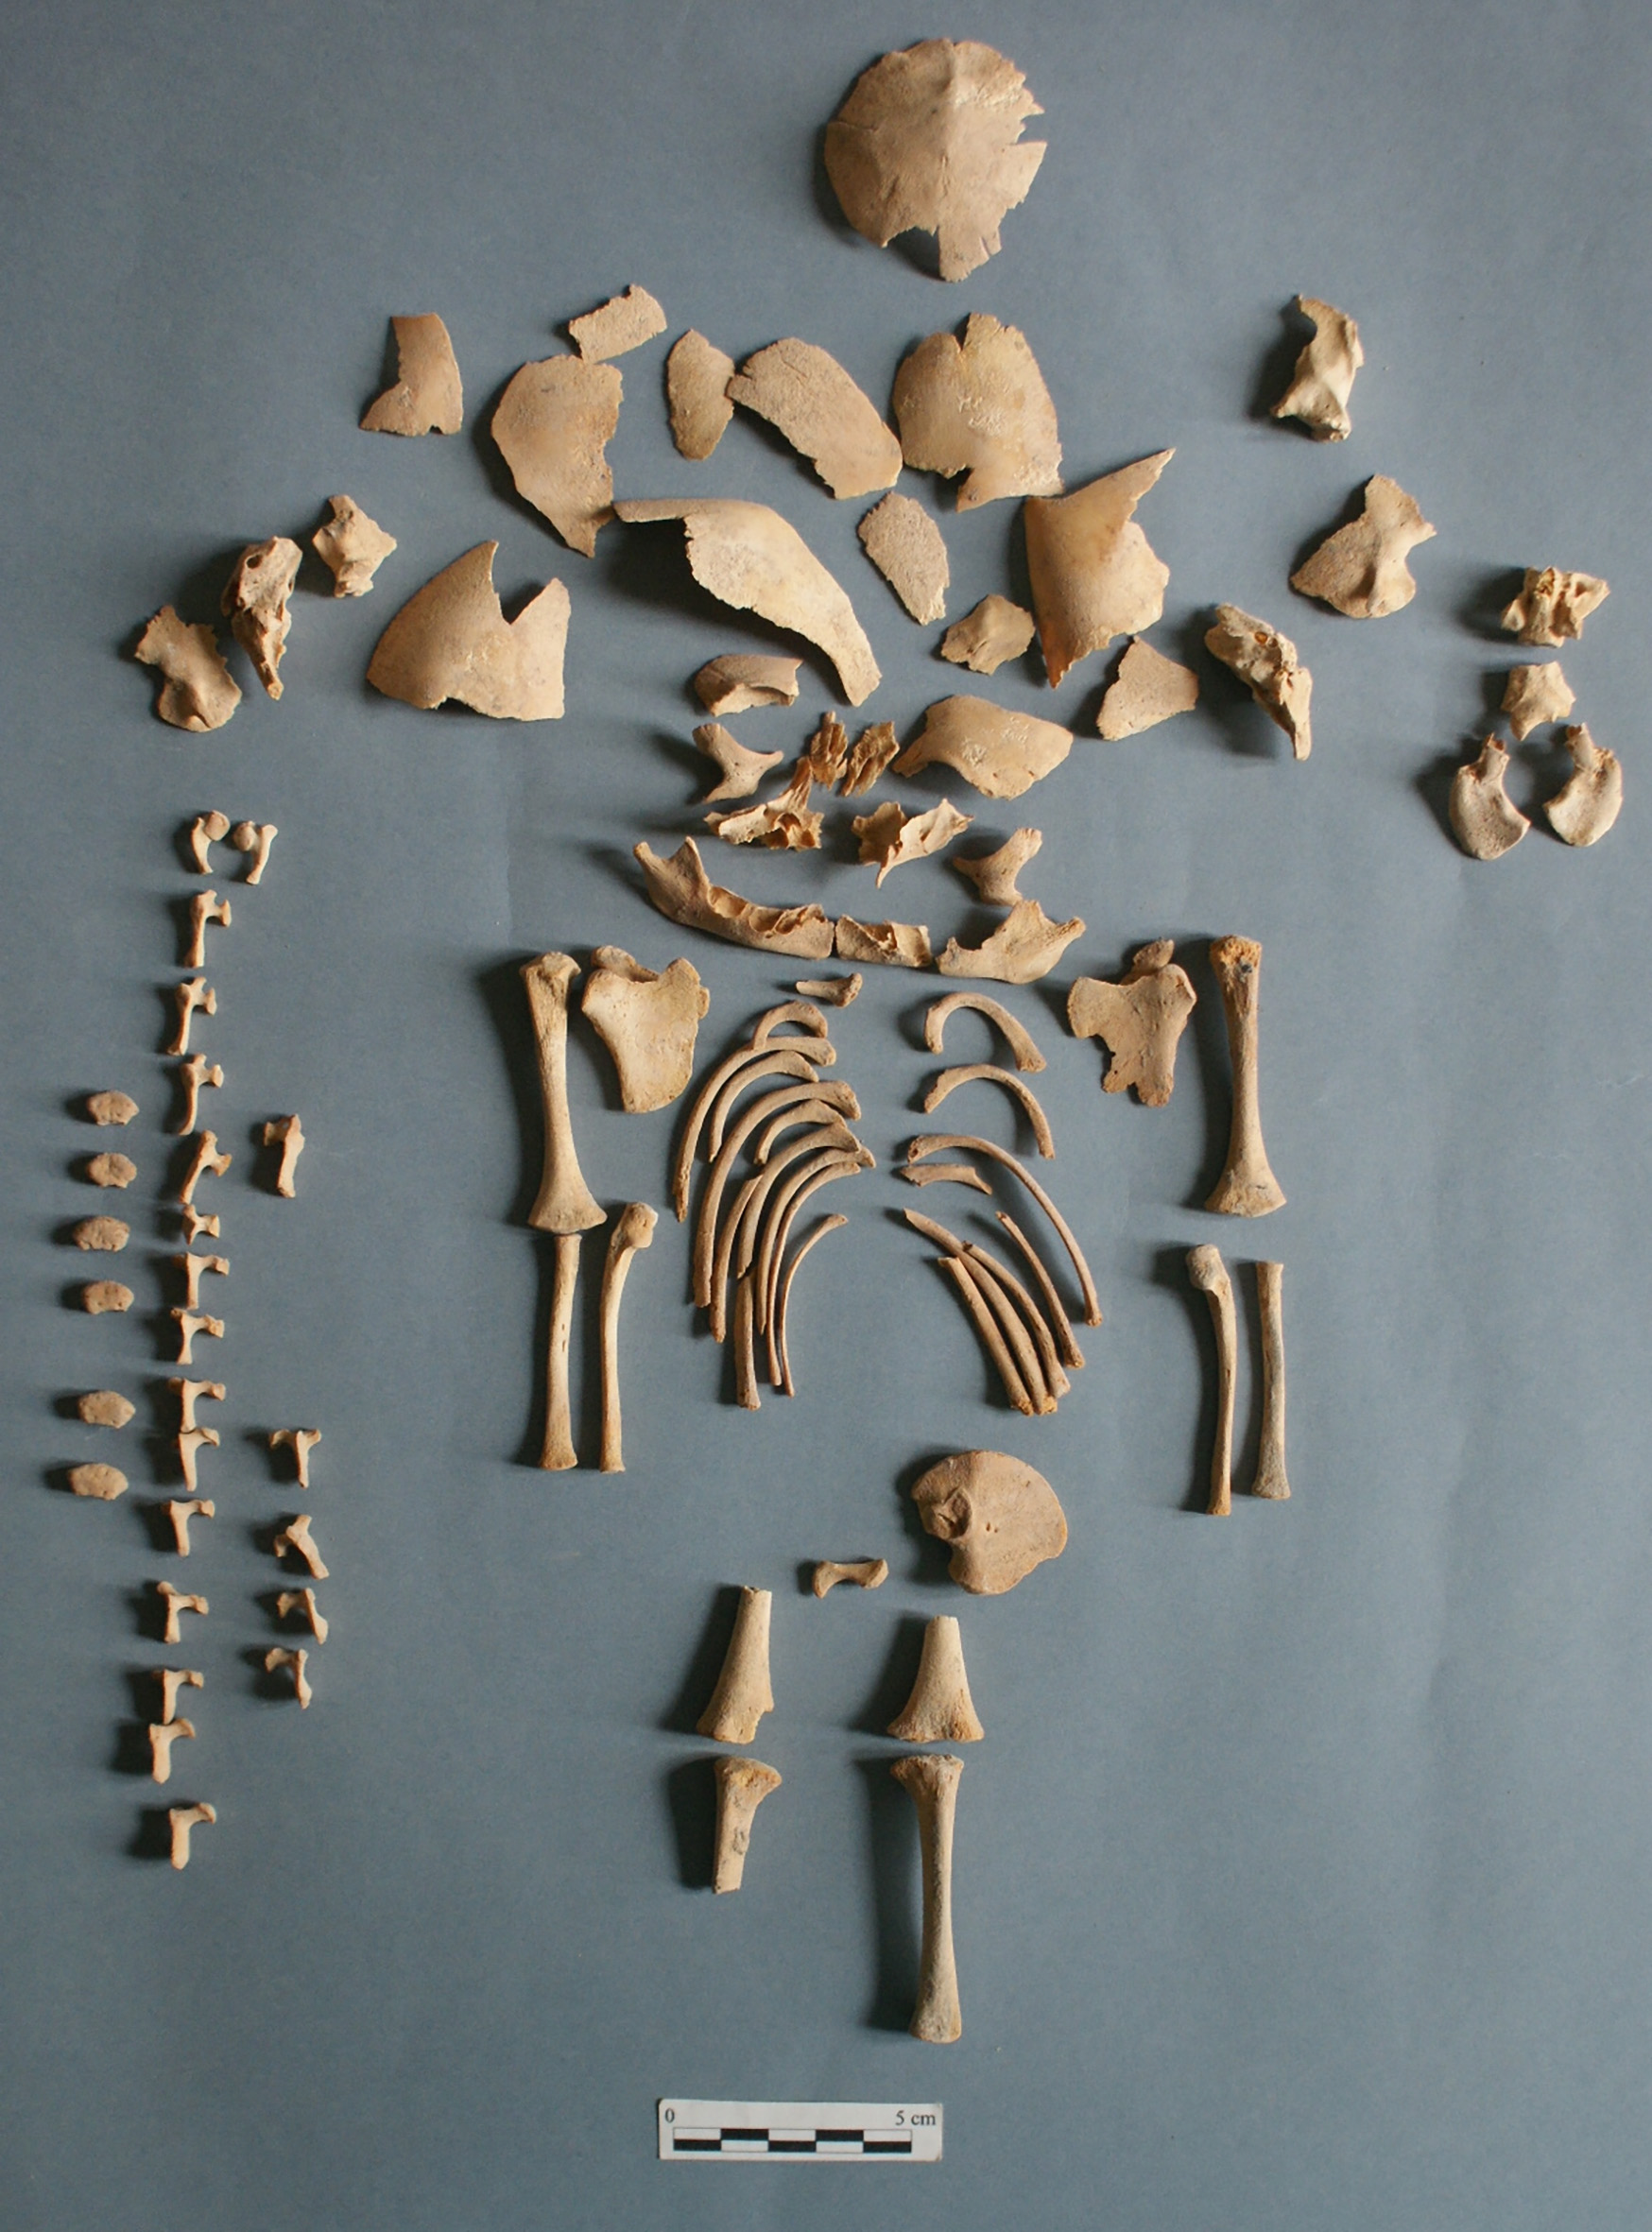 Remains-of-Individual-CRU001-Who-Had-Down-Syndrome.jpg